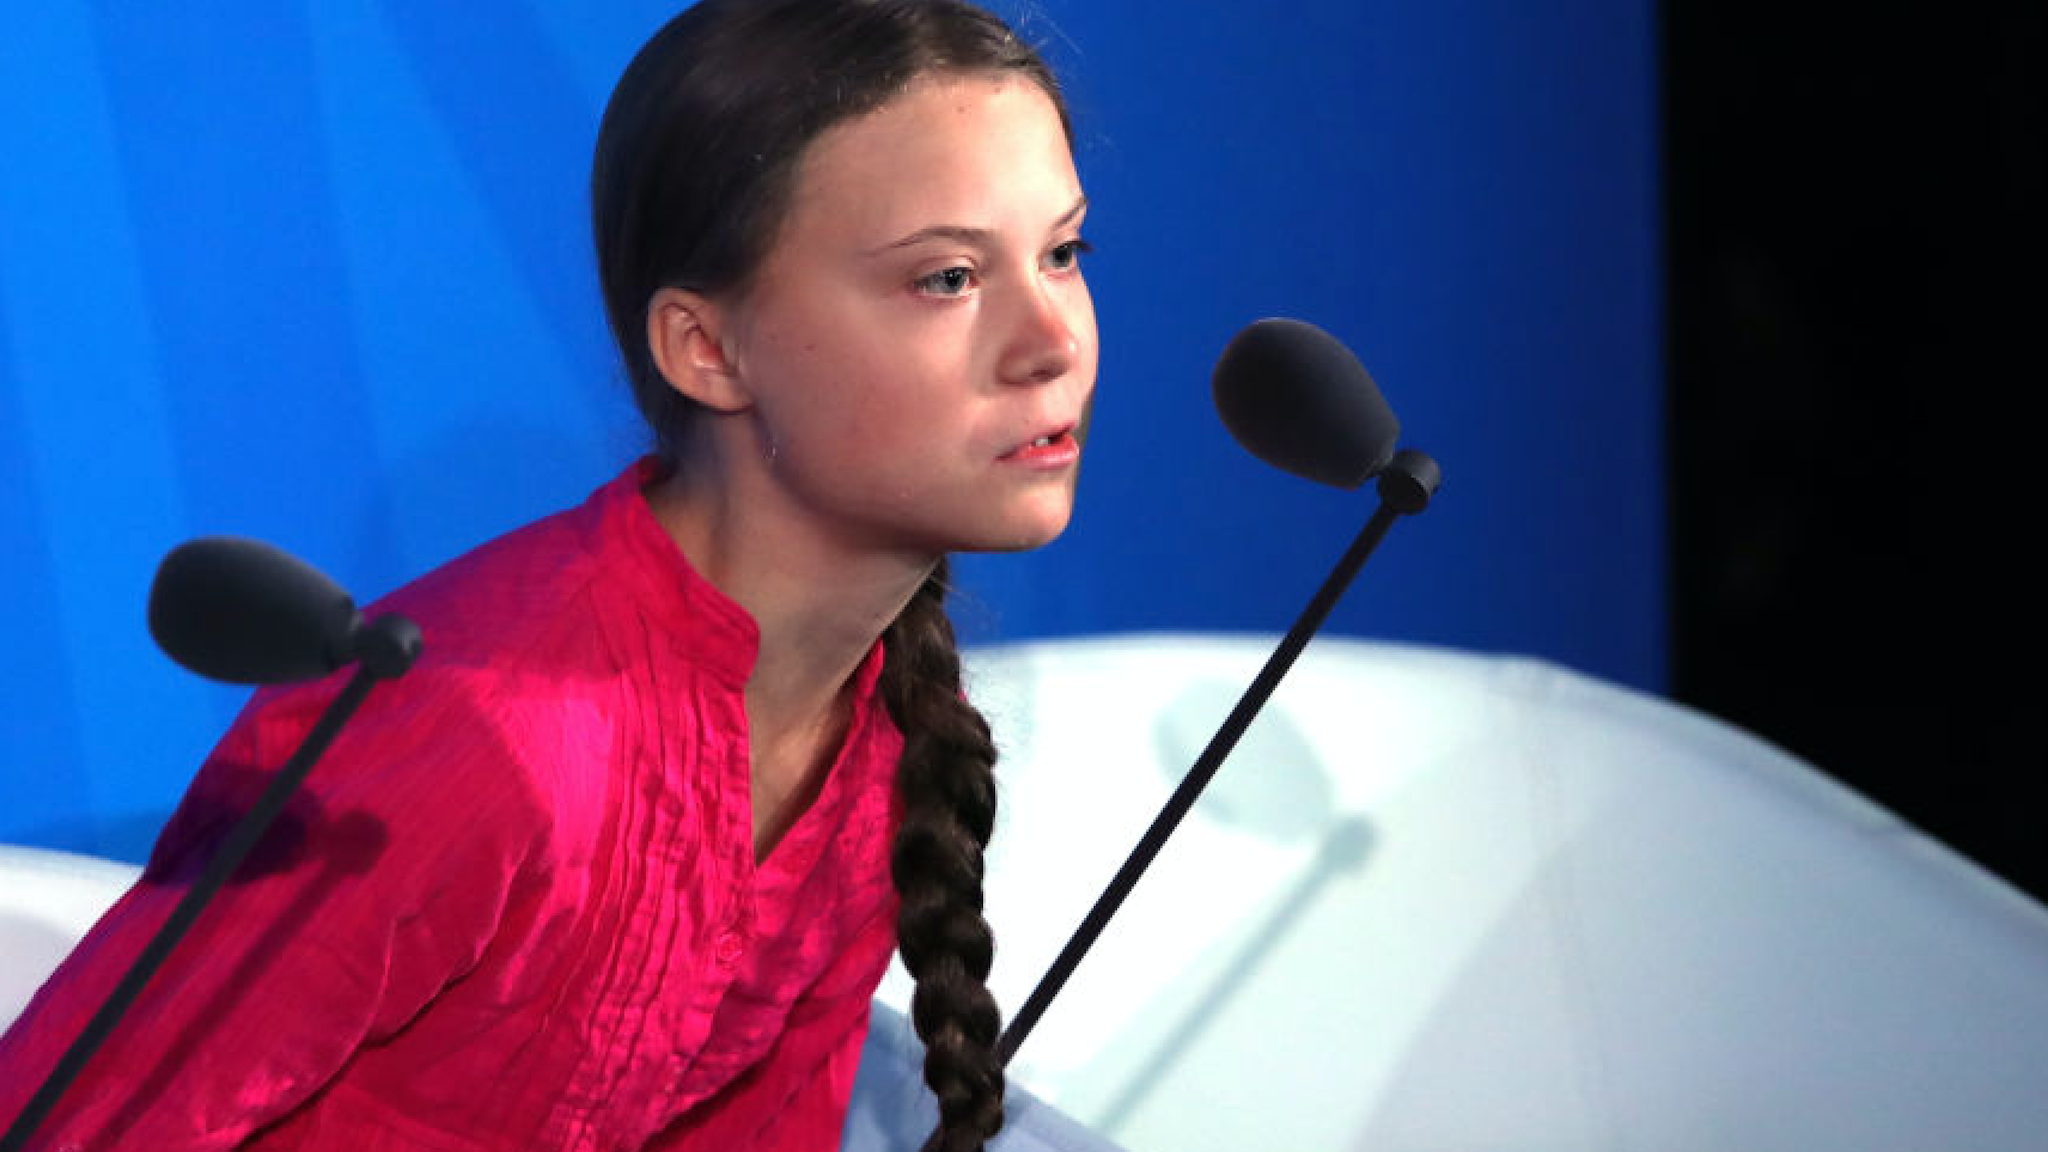 Greta Thunberg speaks at the United Nations (U.N.) where world leaders are holding a summit on climate change on September 23, 2019 in New York City.